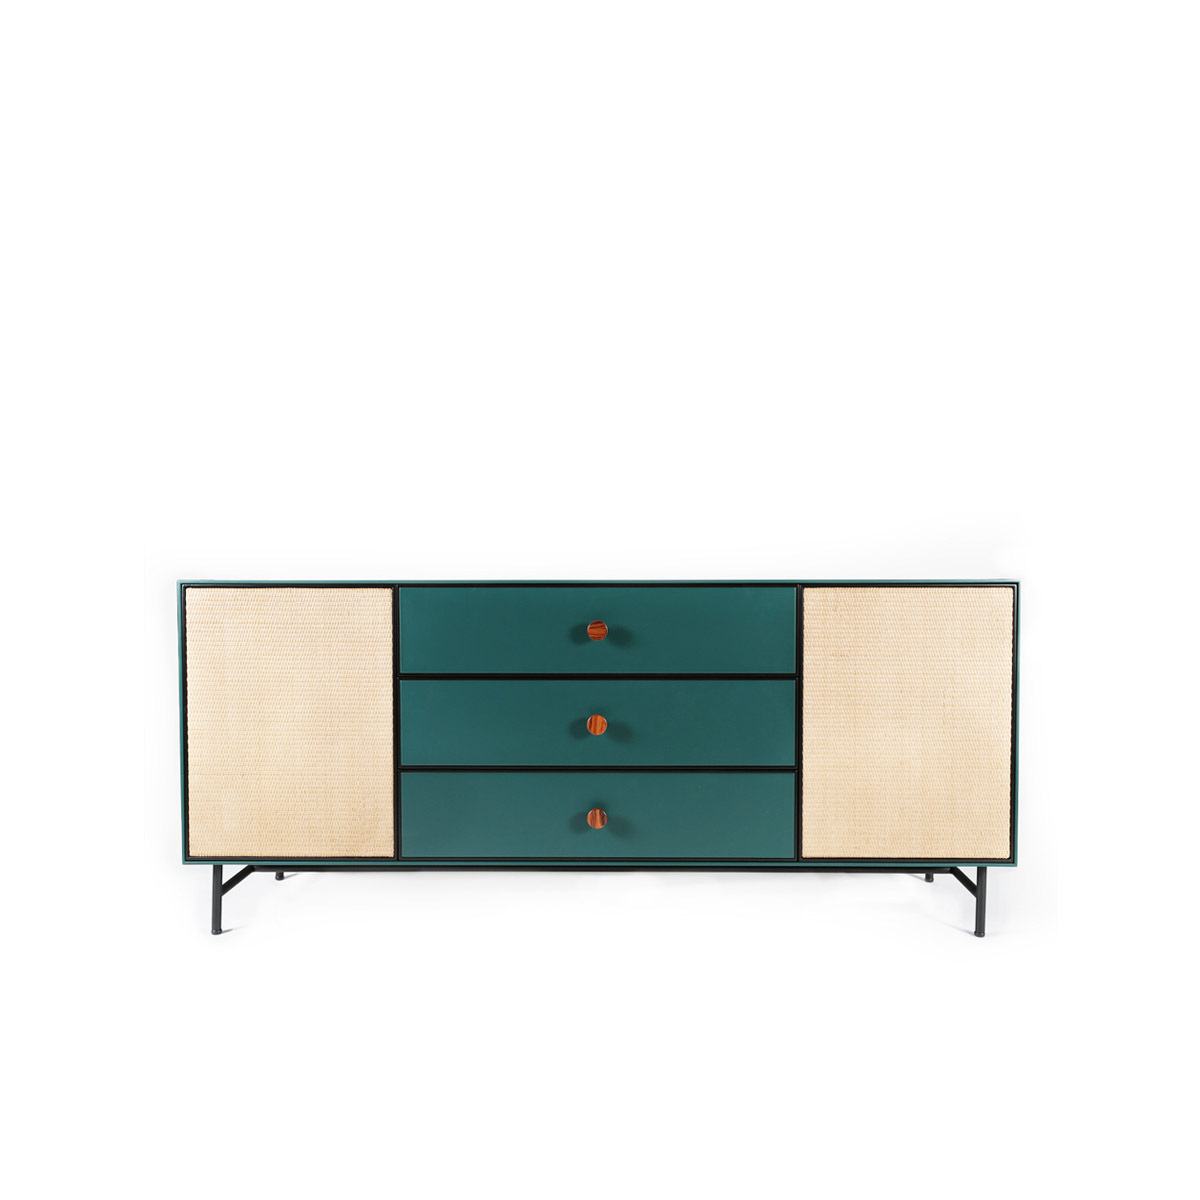 Sideboard Essence, Green / Black - L180 x W45 x H75 cm - Lacquered wood - image 1